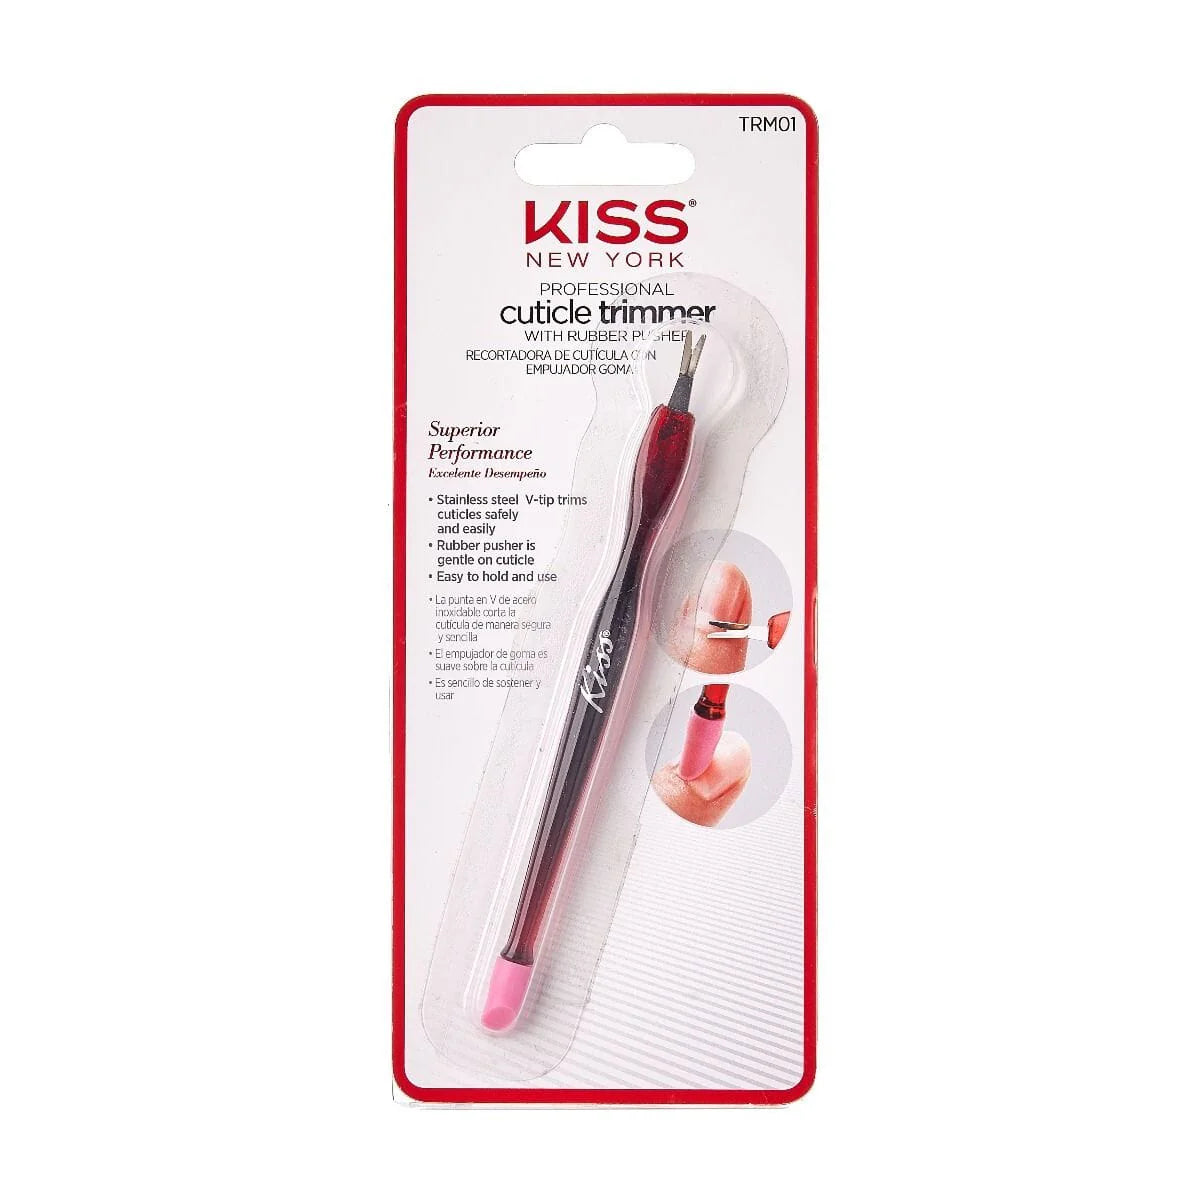 KISS Cuticle Trimmer